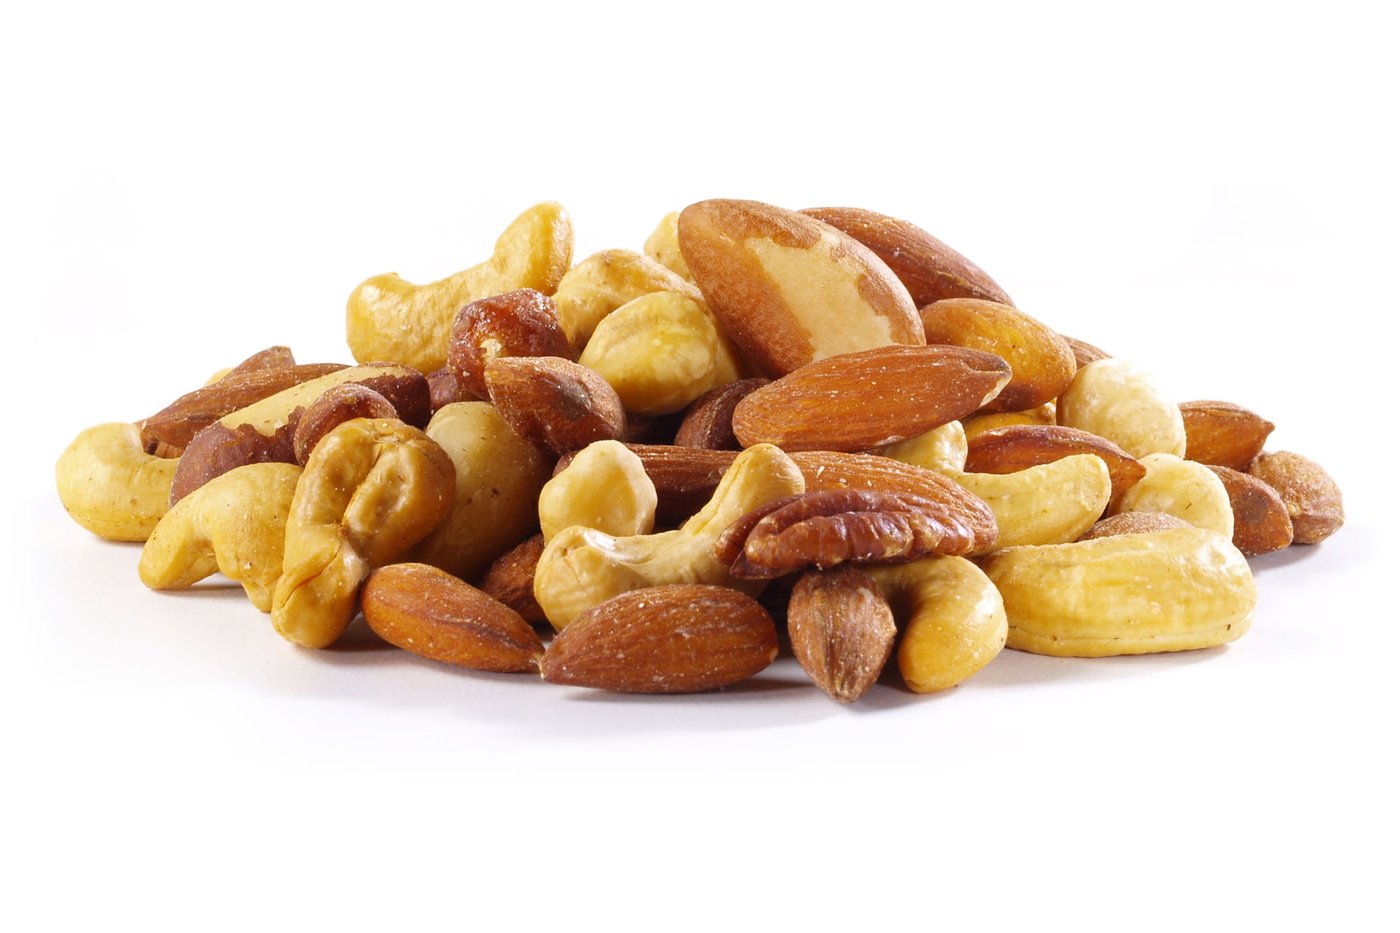 Roasted Mixed Nuts (Unsalted) photo